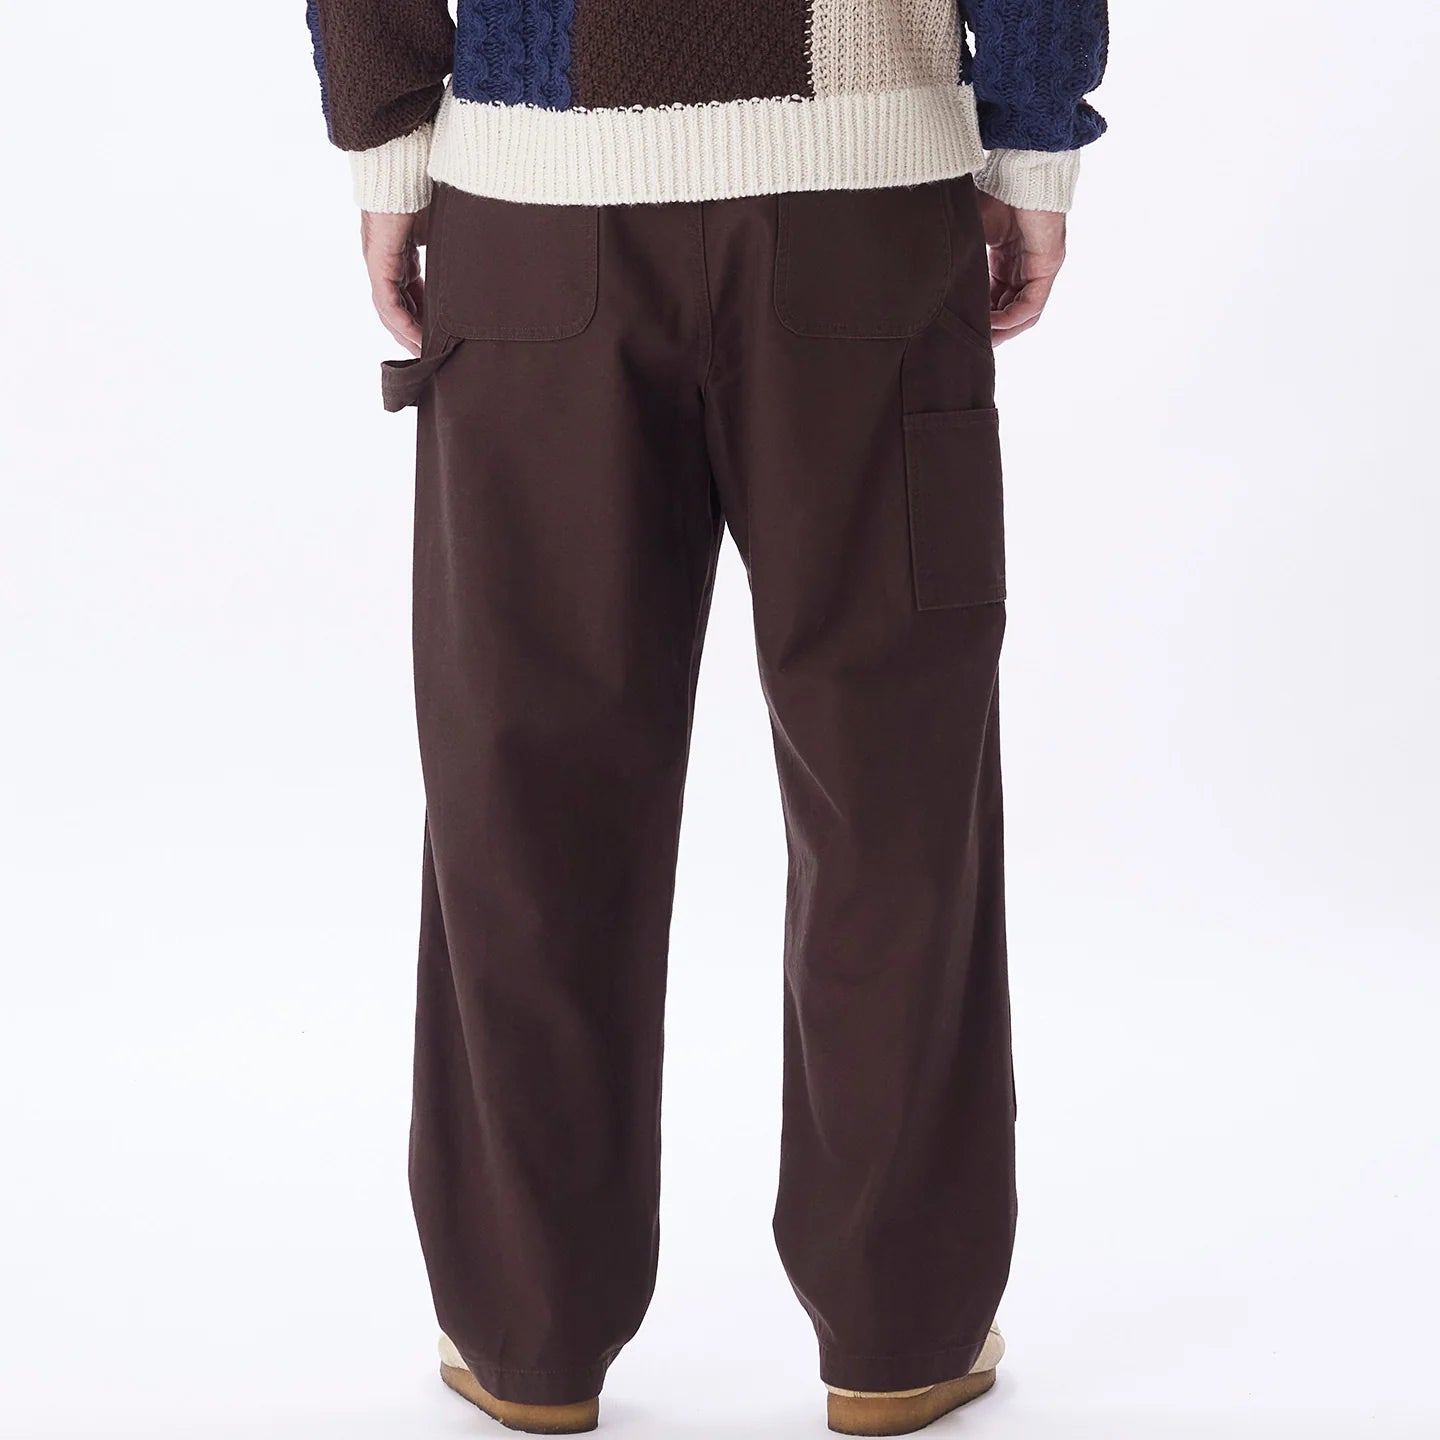 Big timer twill double knee carpenter pant (Java brown)